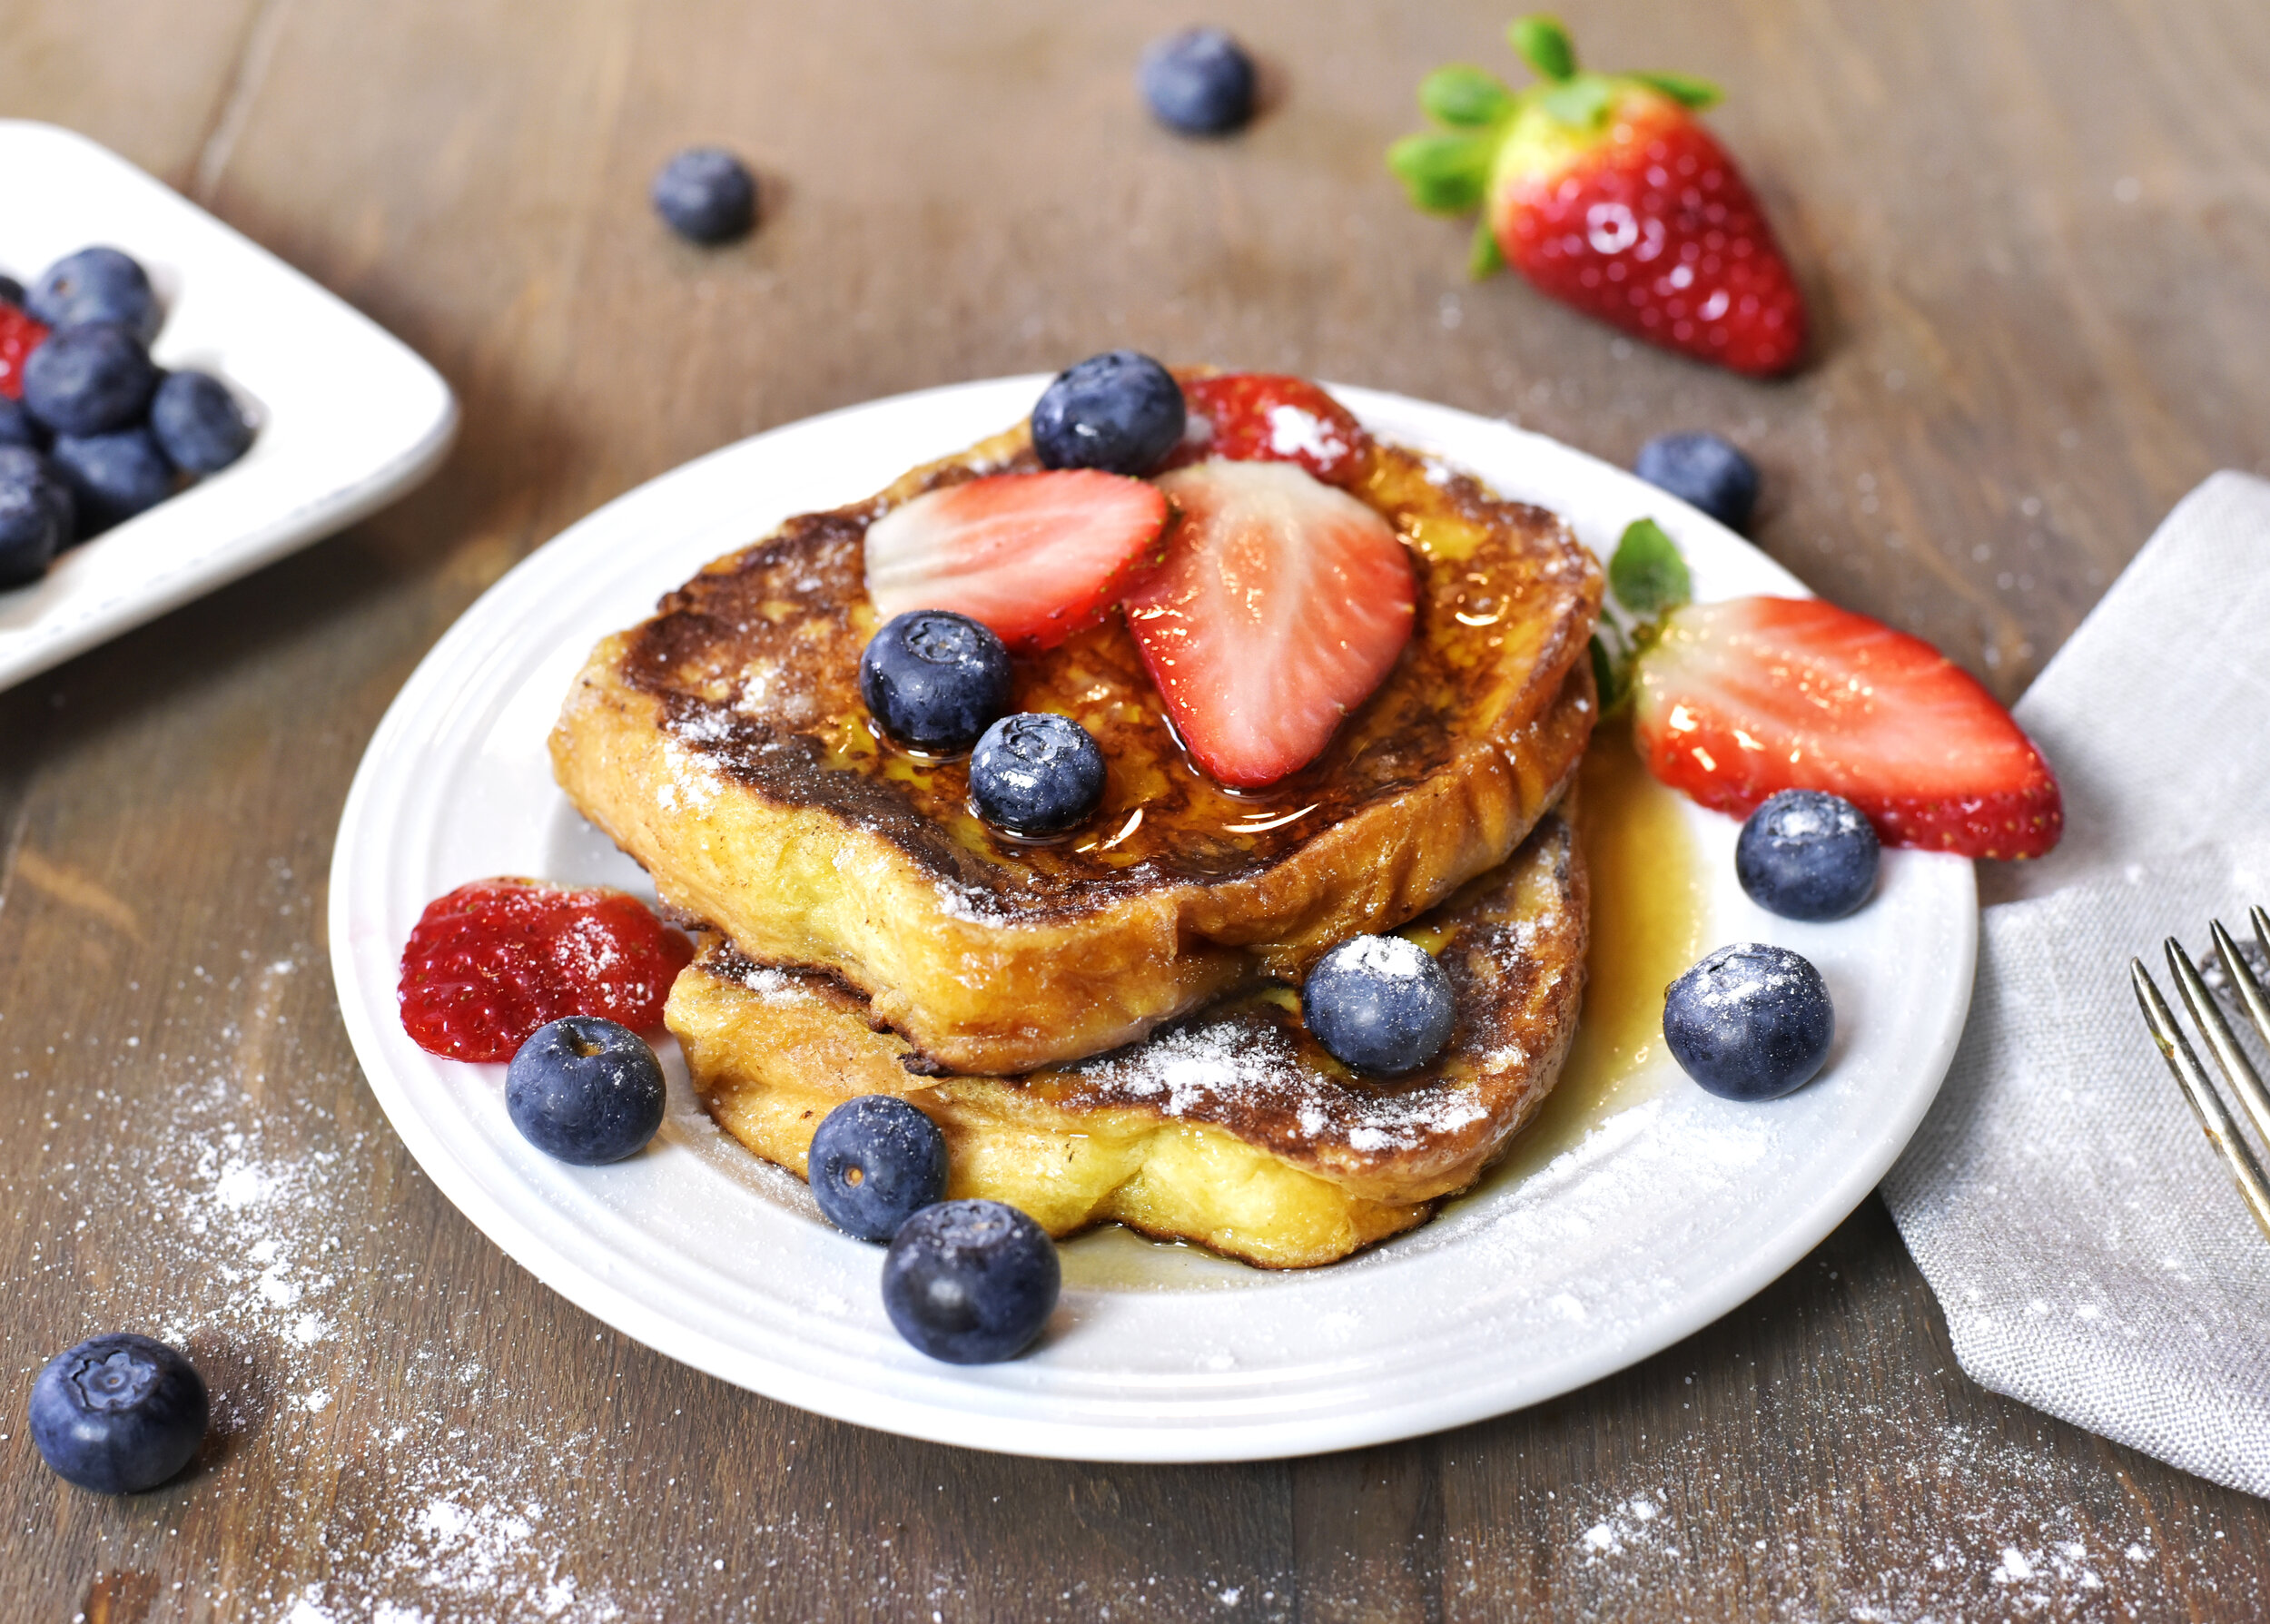 Challah French toast with warm maple syrup and fresh fruit